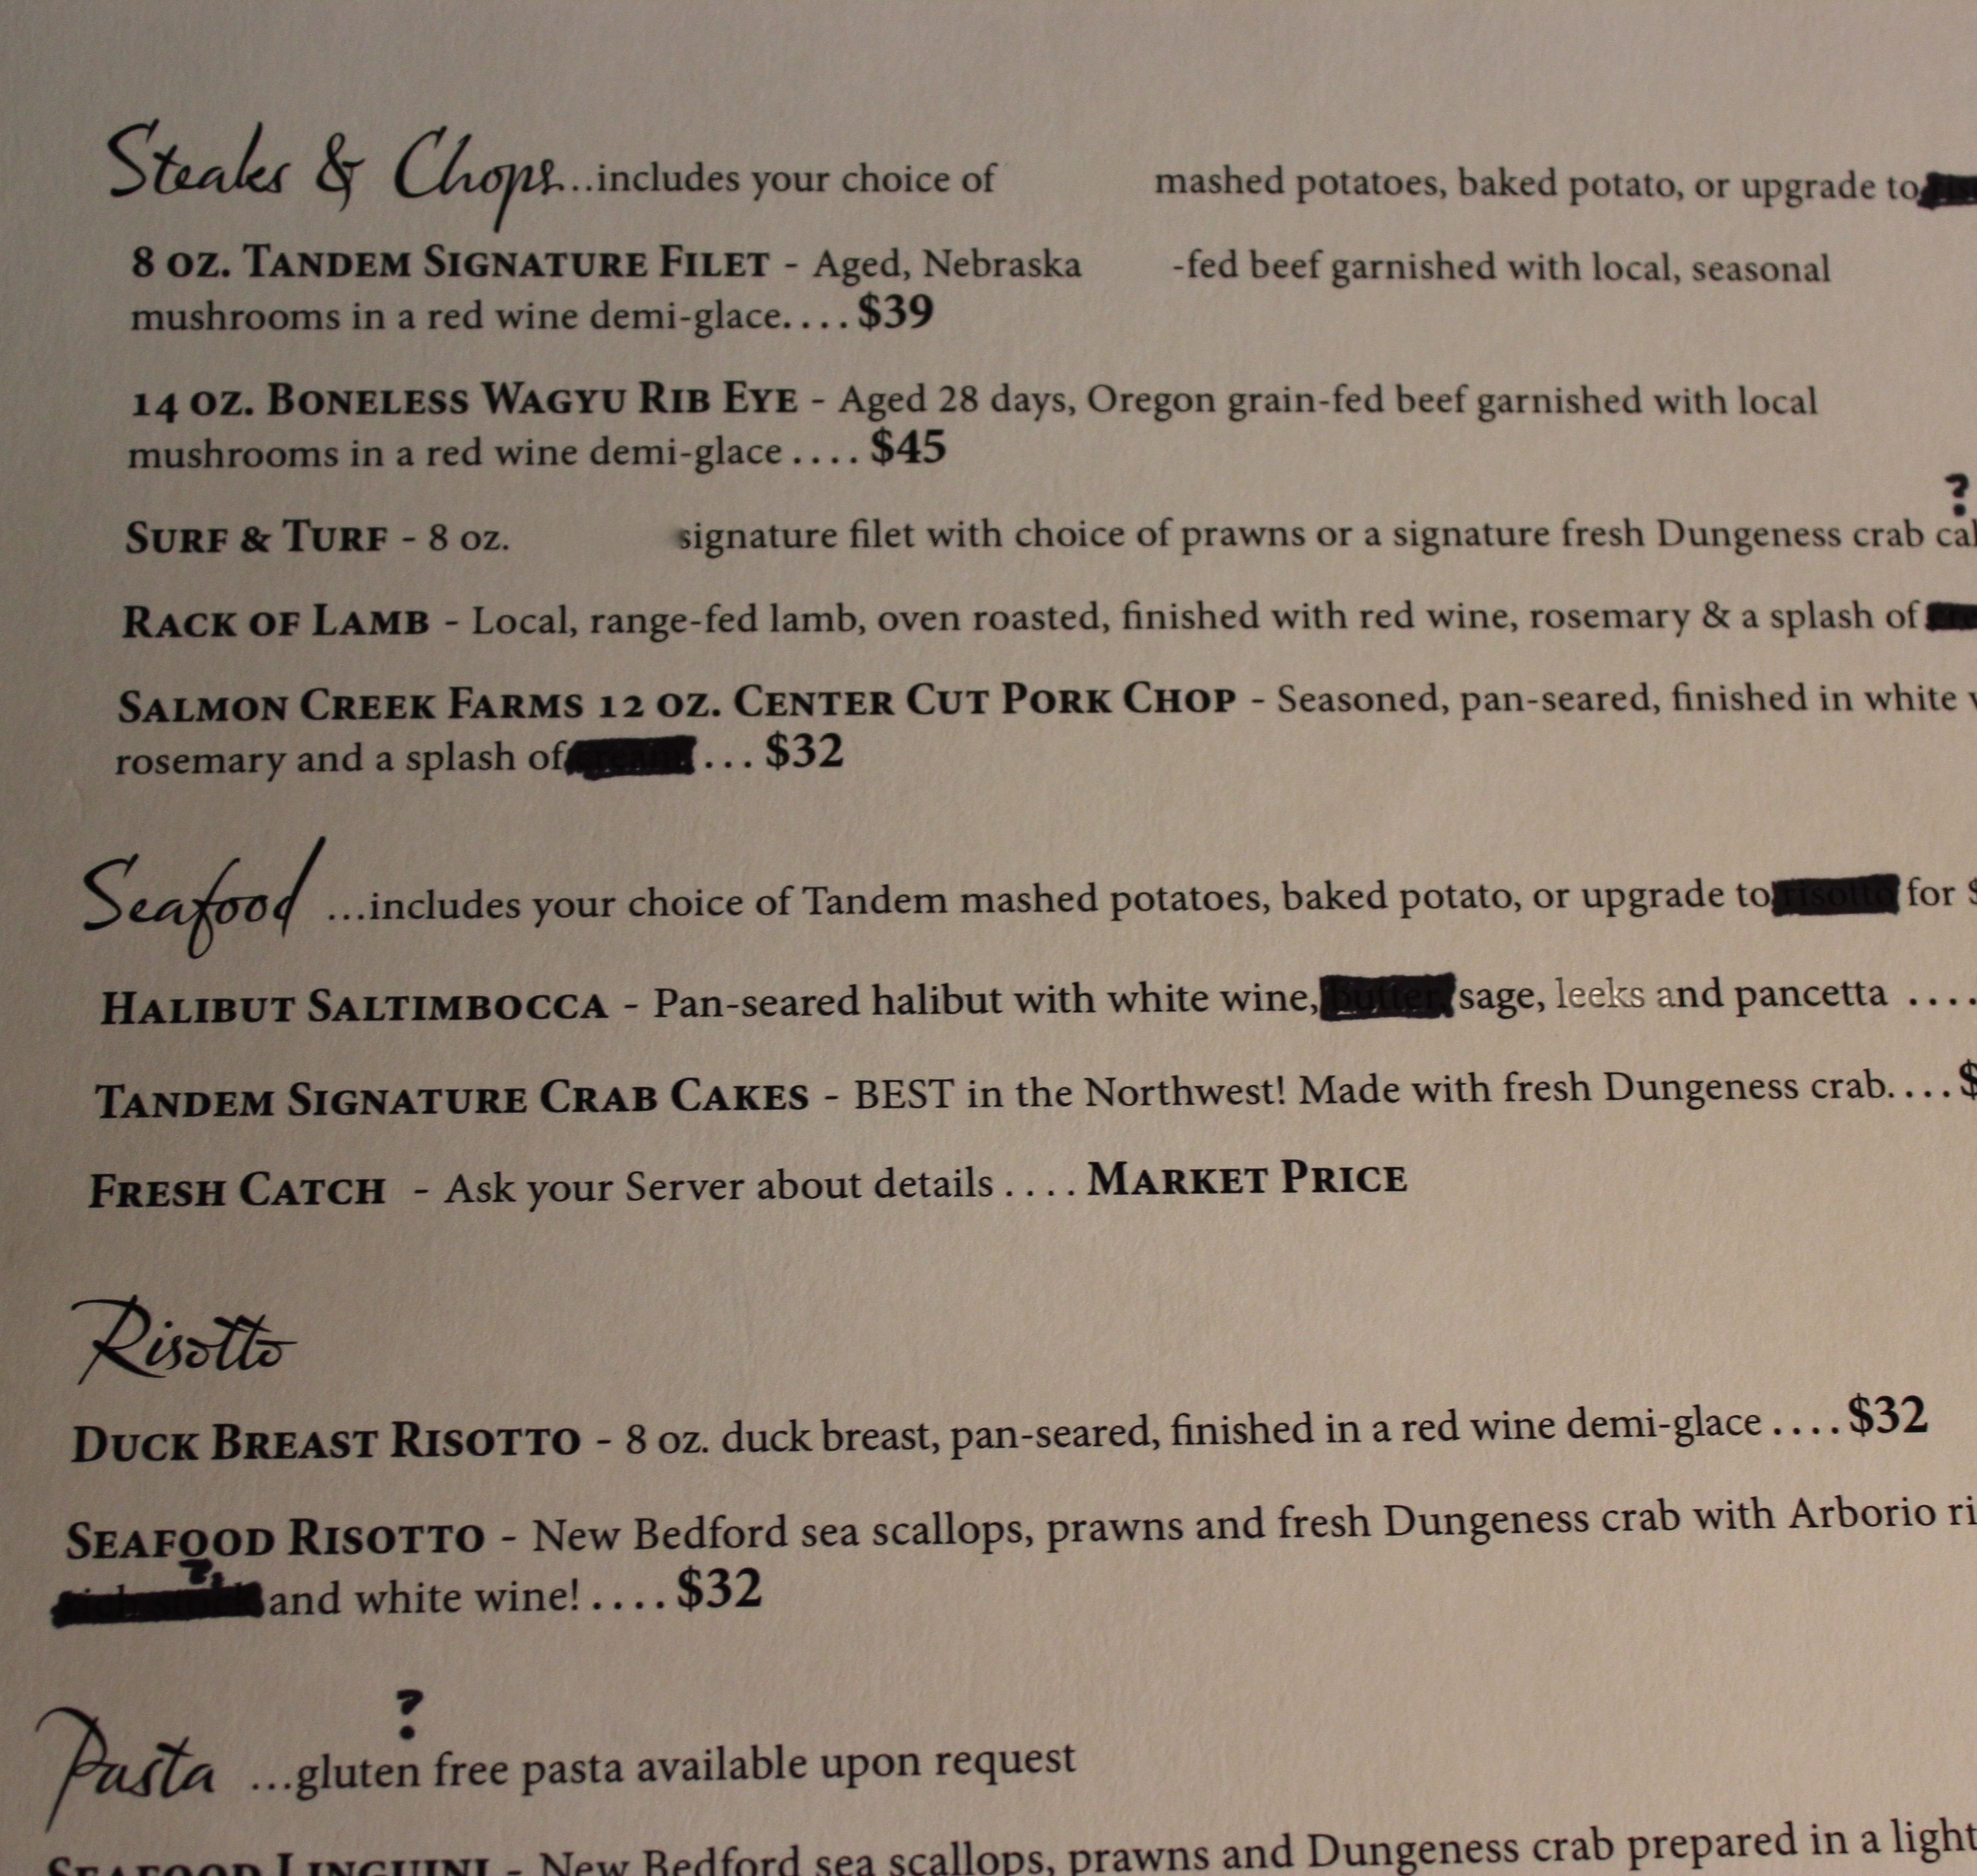 Another section of the same printed menu as used in the former two pictures, with ingredients blacked out.